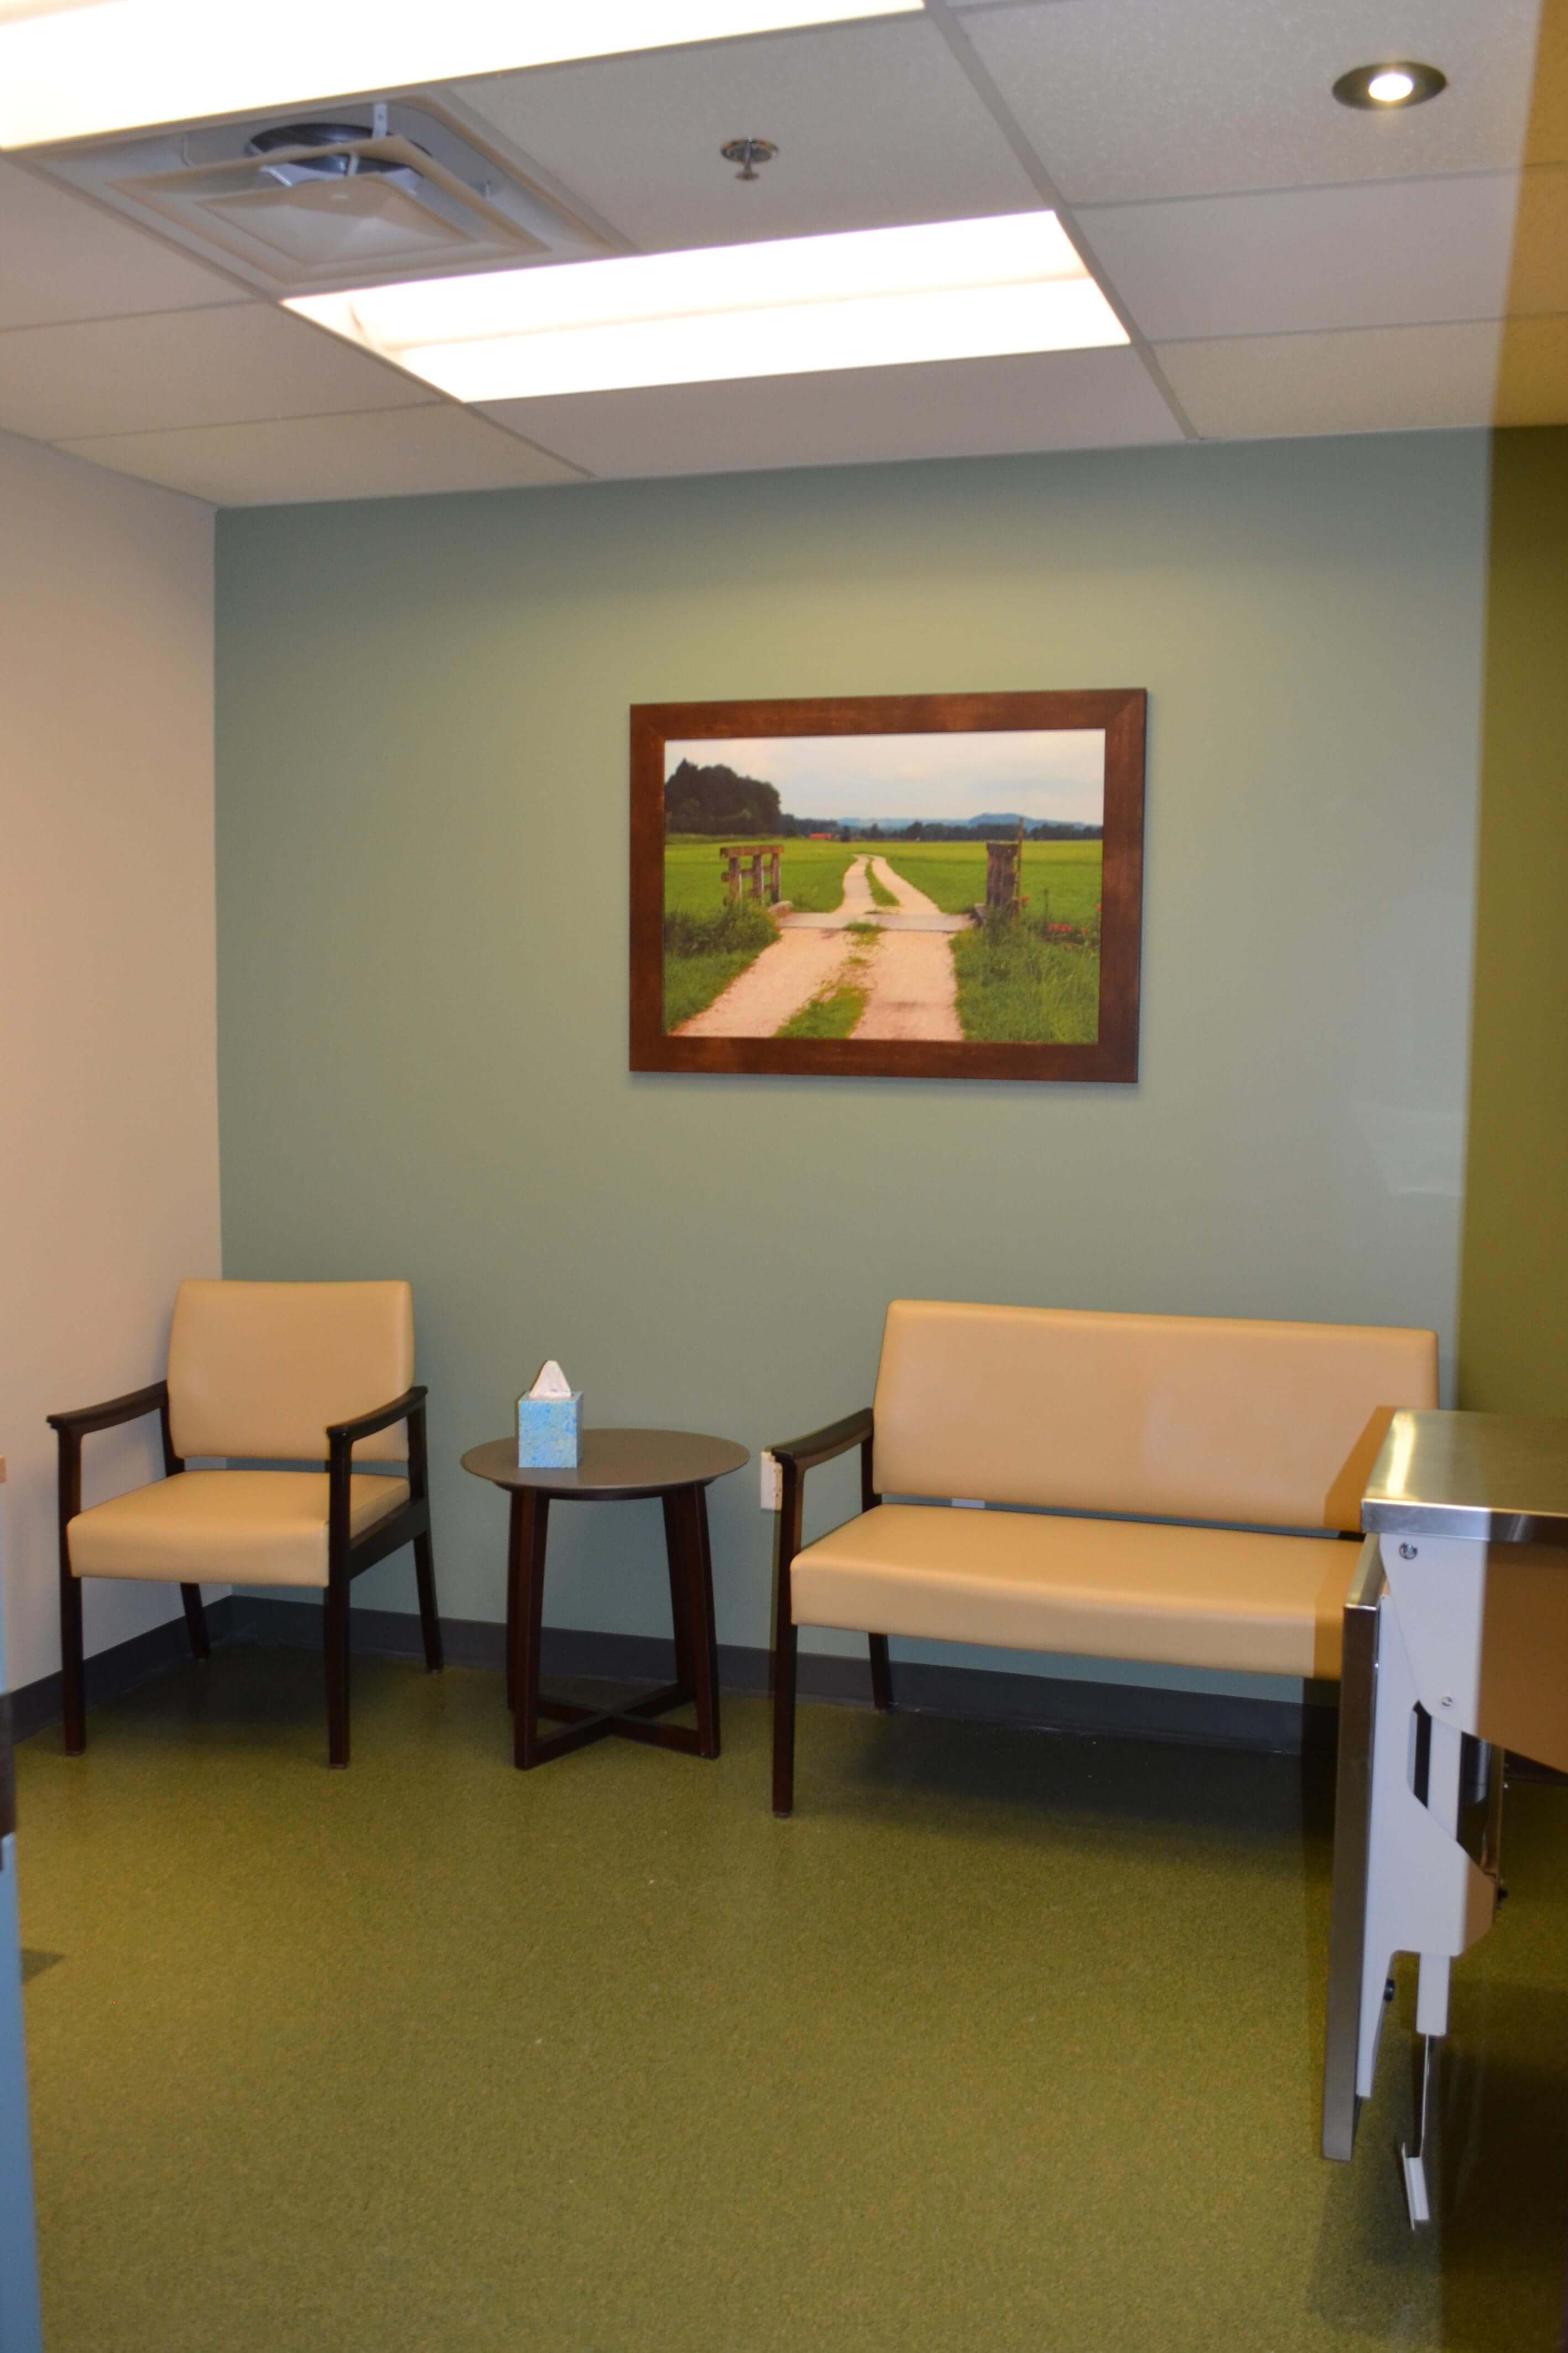 A bench, small table, and chair are in the compassion room.